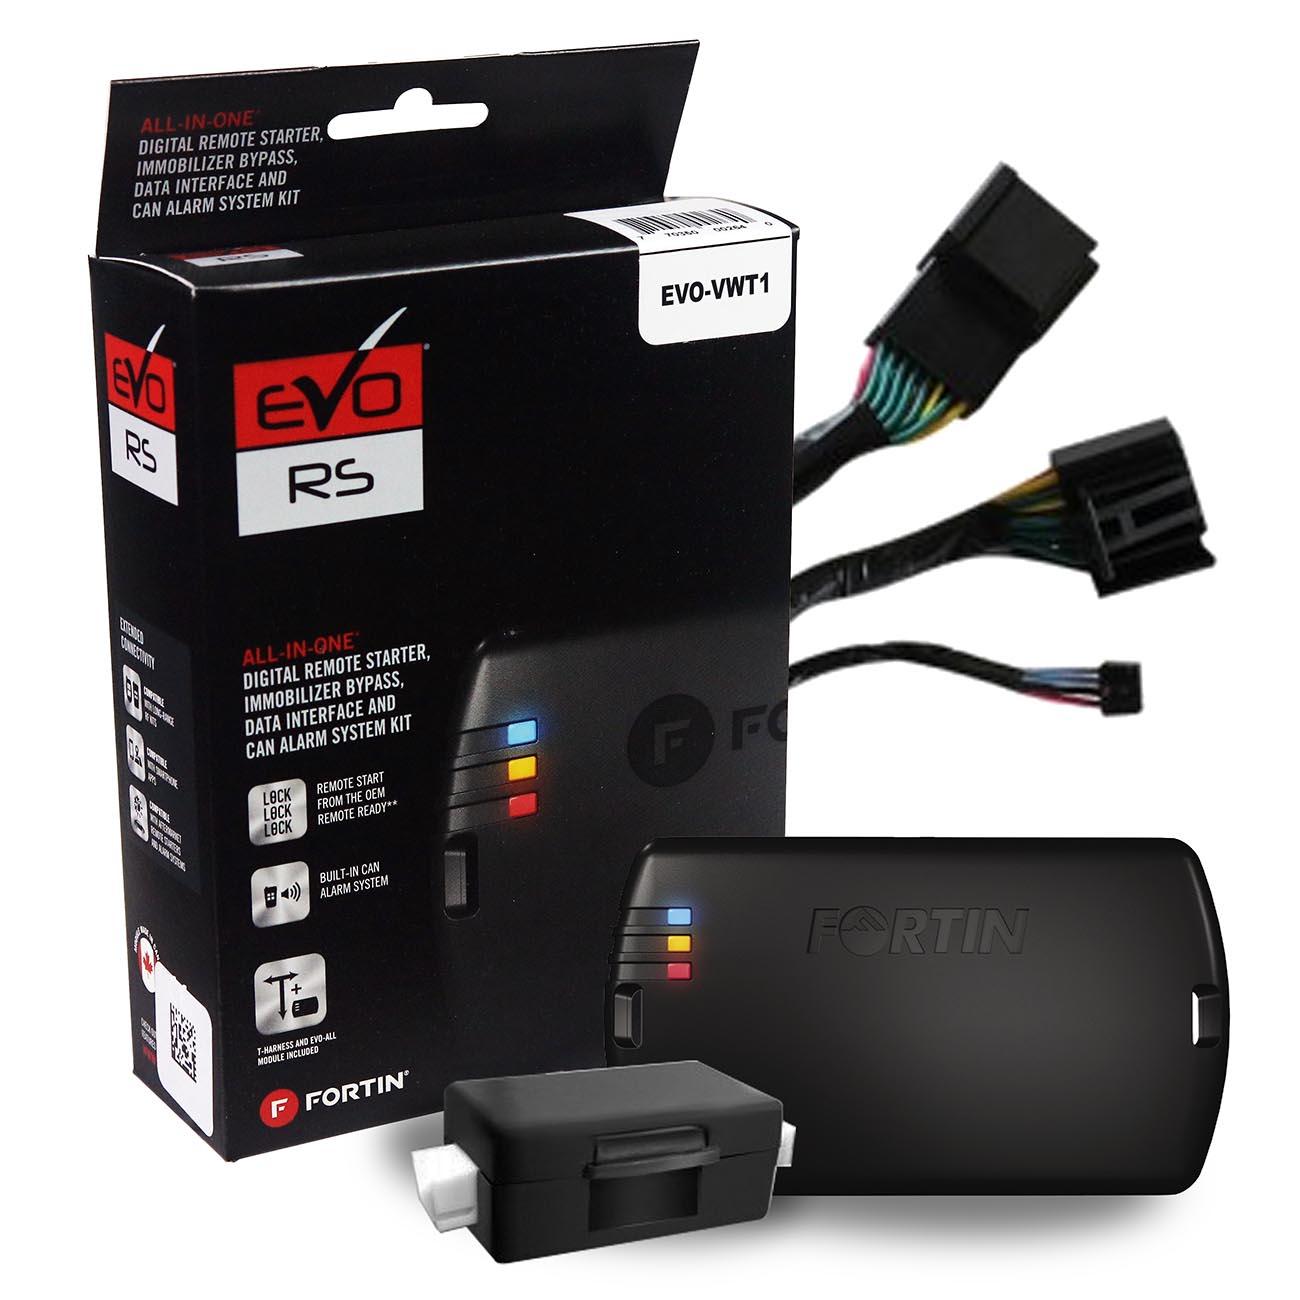 EVOVWT1 Fortin Remote Start Module & T-Harness Combo for â€˜11 -â€˜19 Volkswagen Vehicles